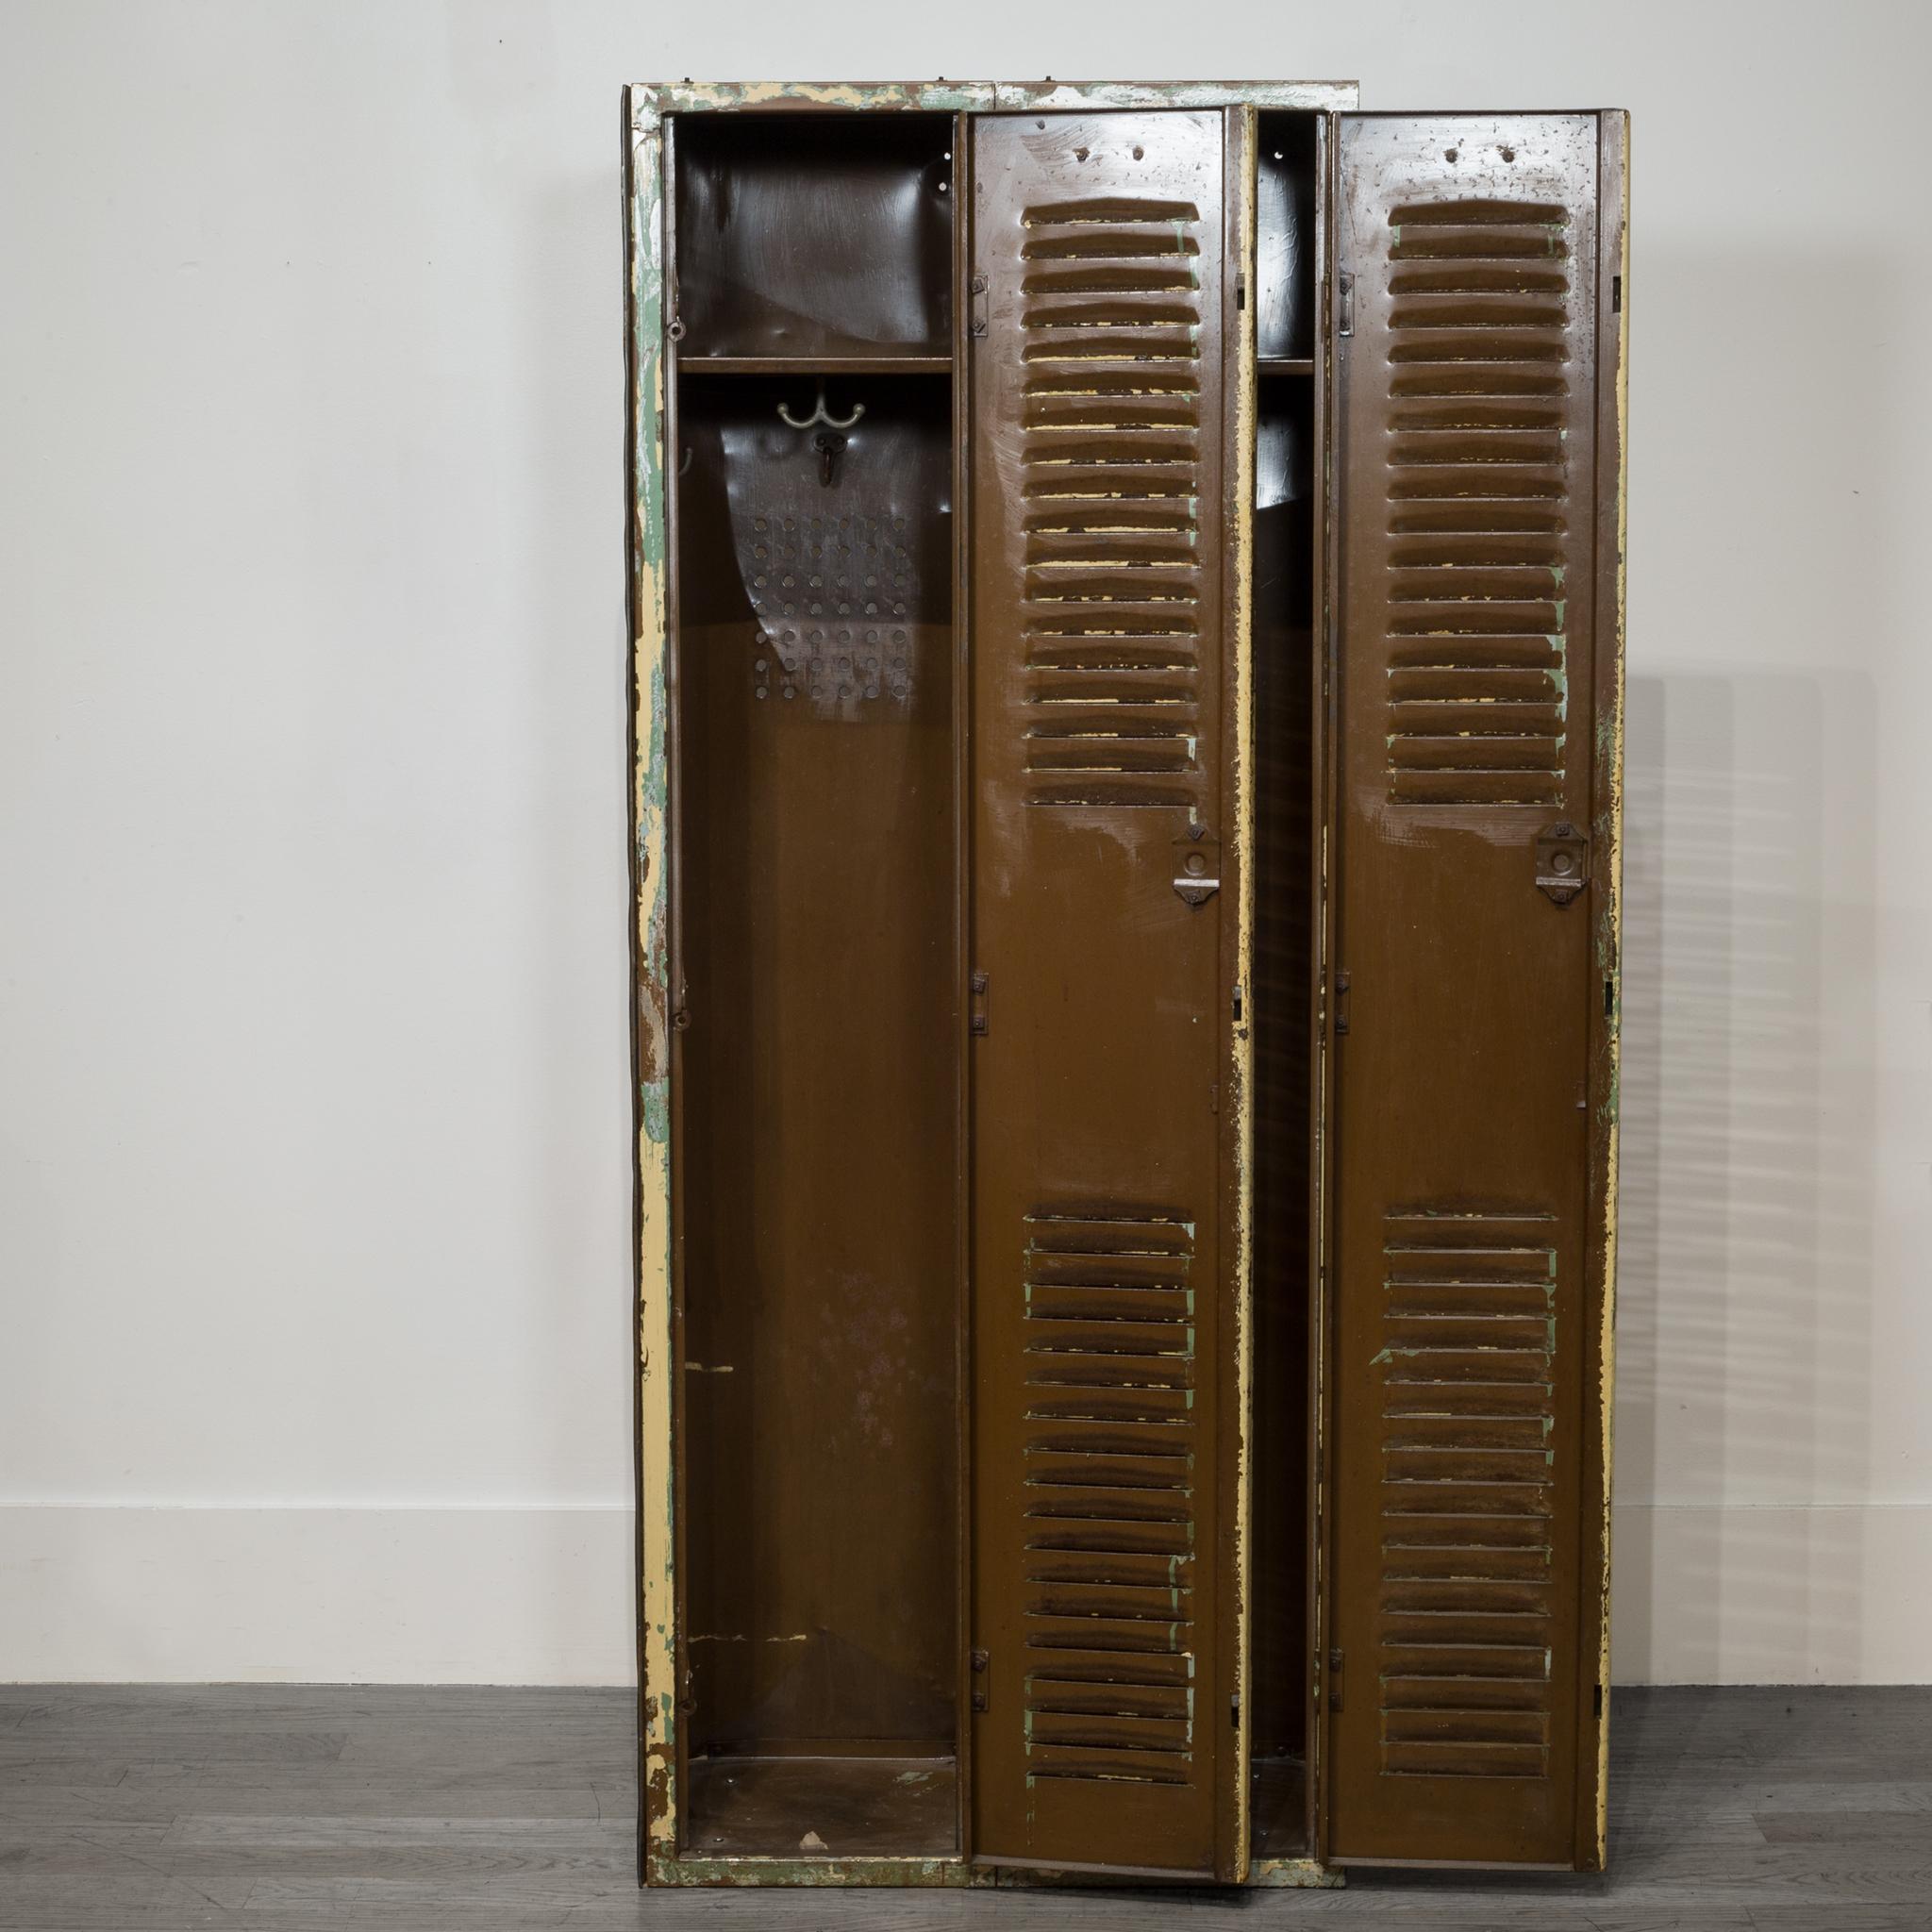 About:

This is an set of distressed metal school gym lockers with original number plates. Each side has a top shelf with several clothes hooks attached. The two lockers are attached and one unit. This pair has retain some of its original finish